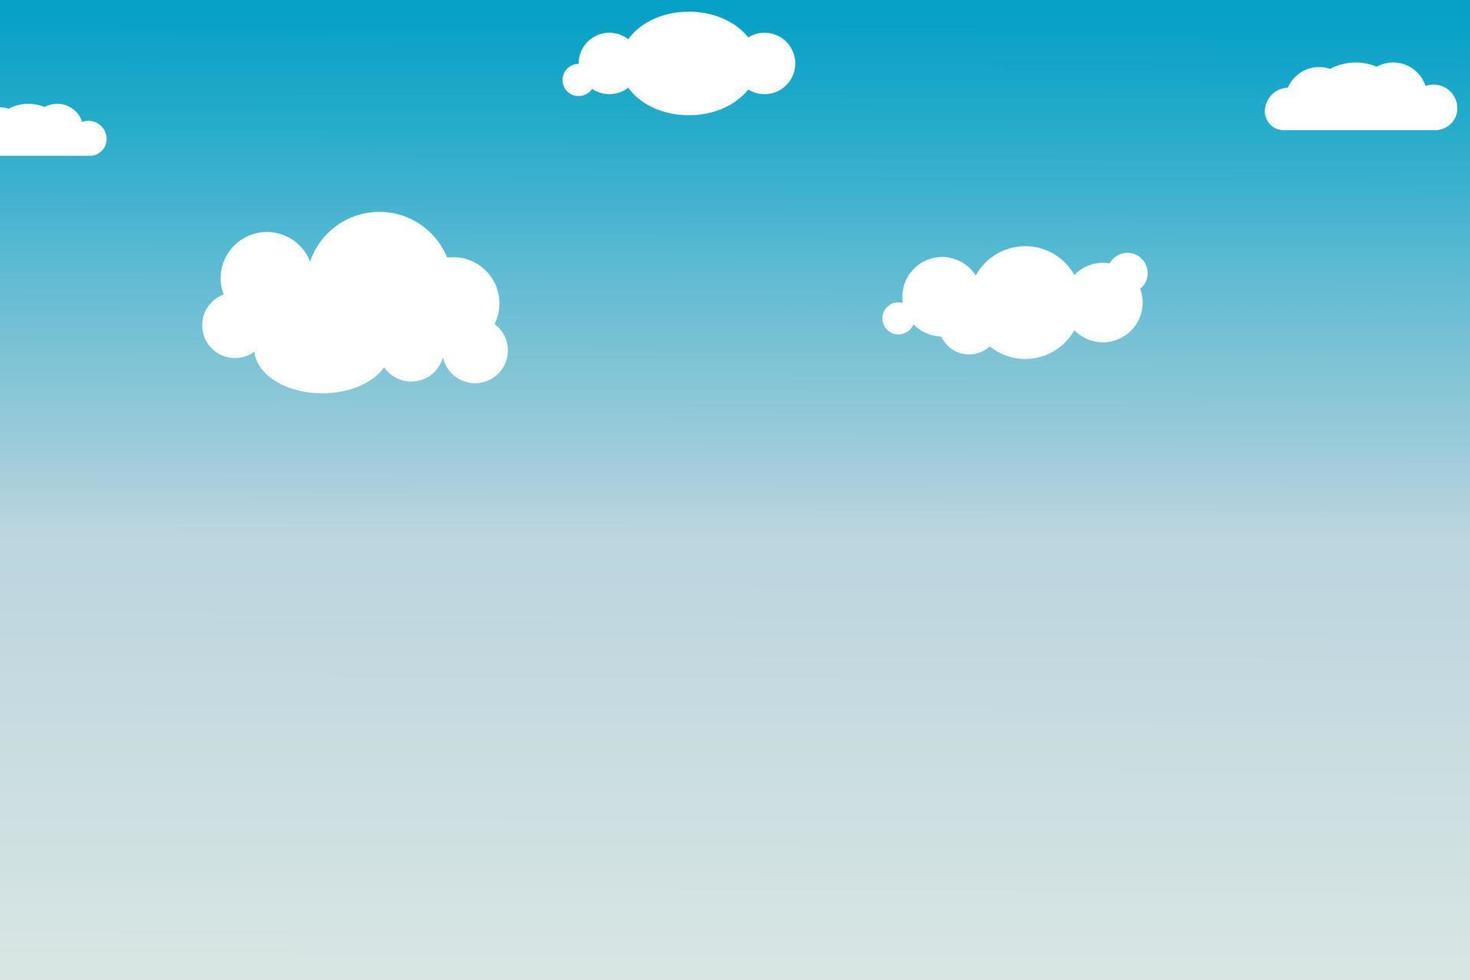 blue sky with clouds background illustration vector